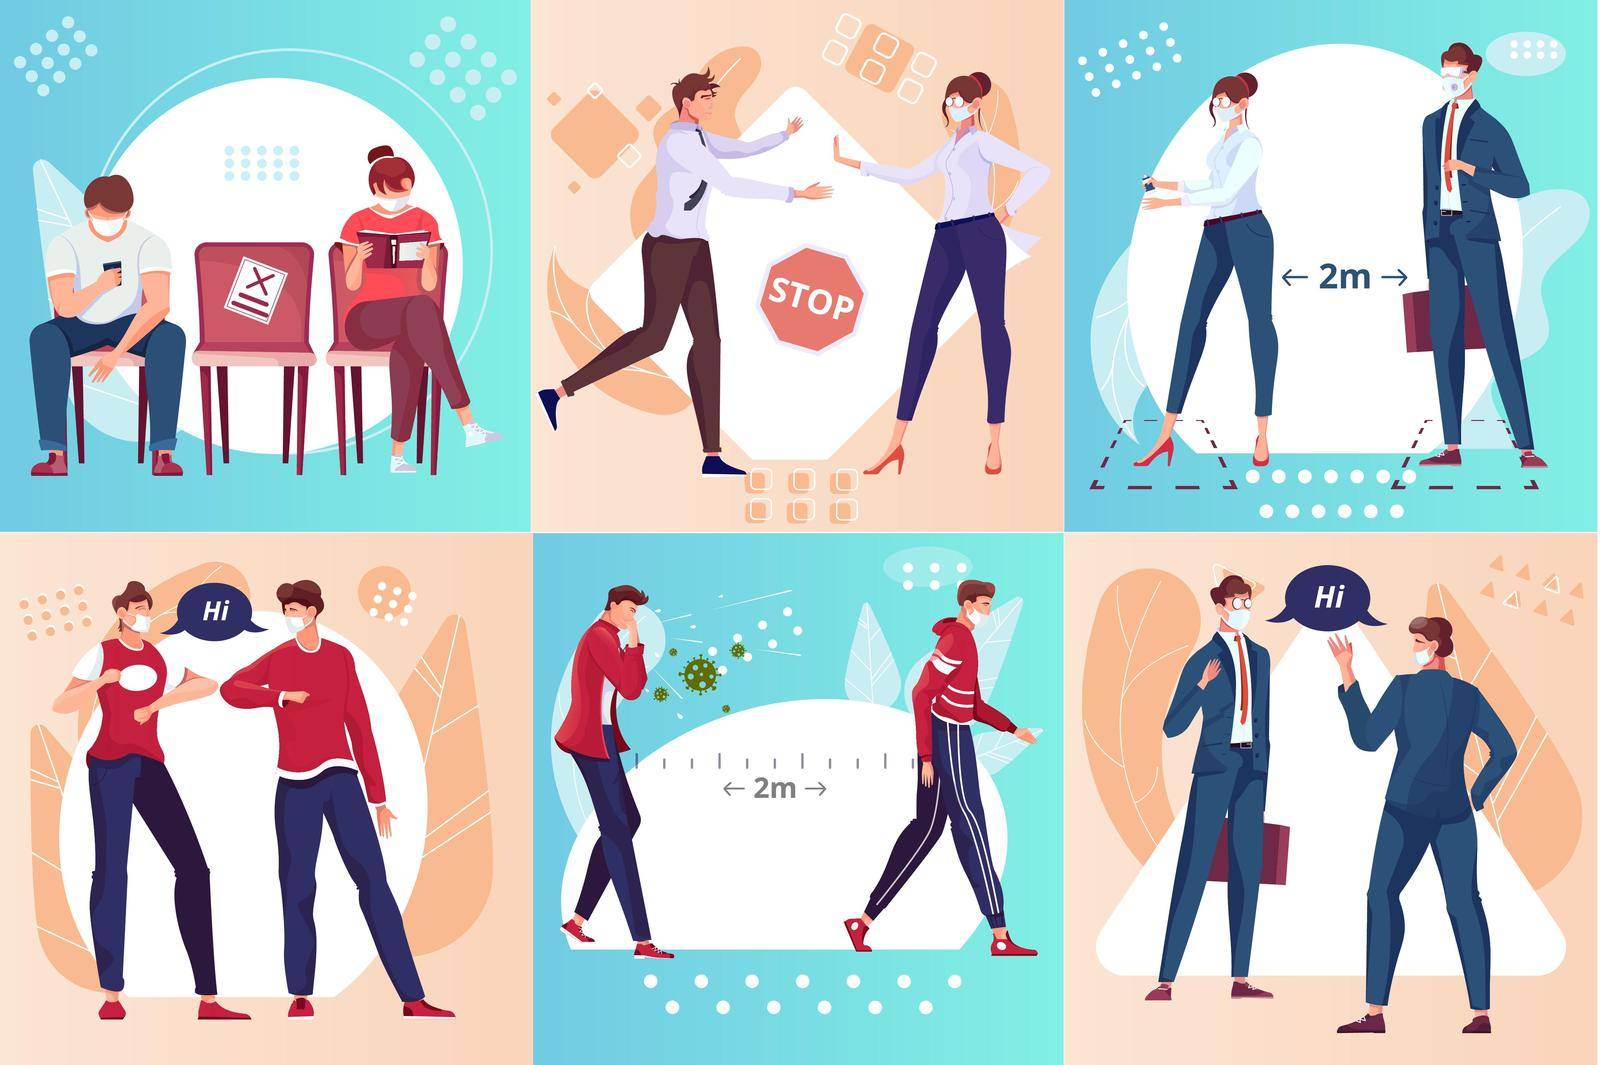 Social distance design concept with doodle human characters of colleagues coworkers and stop signs with arrows vector illustration